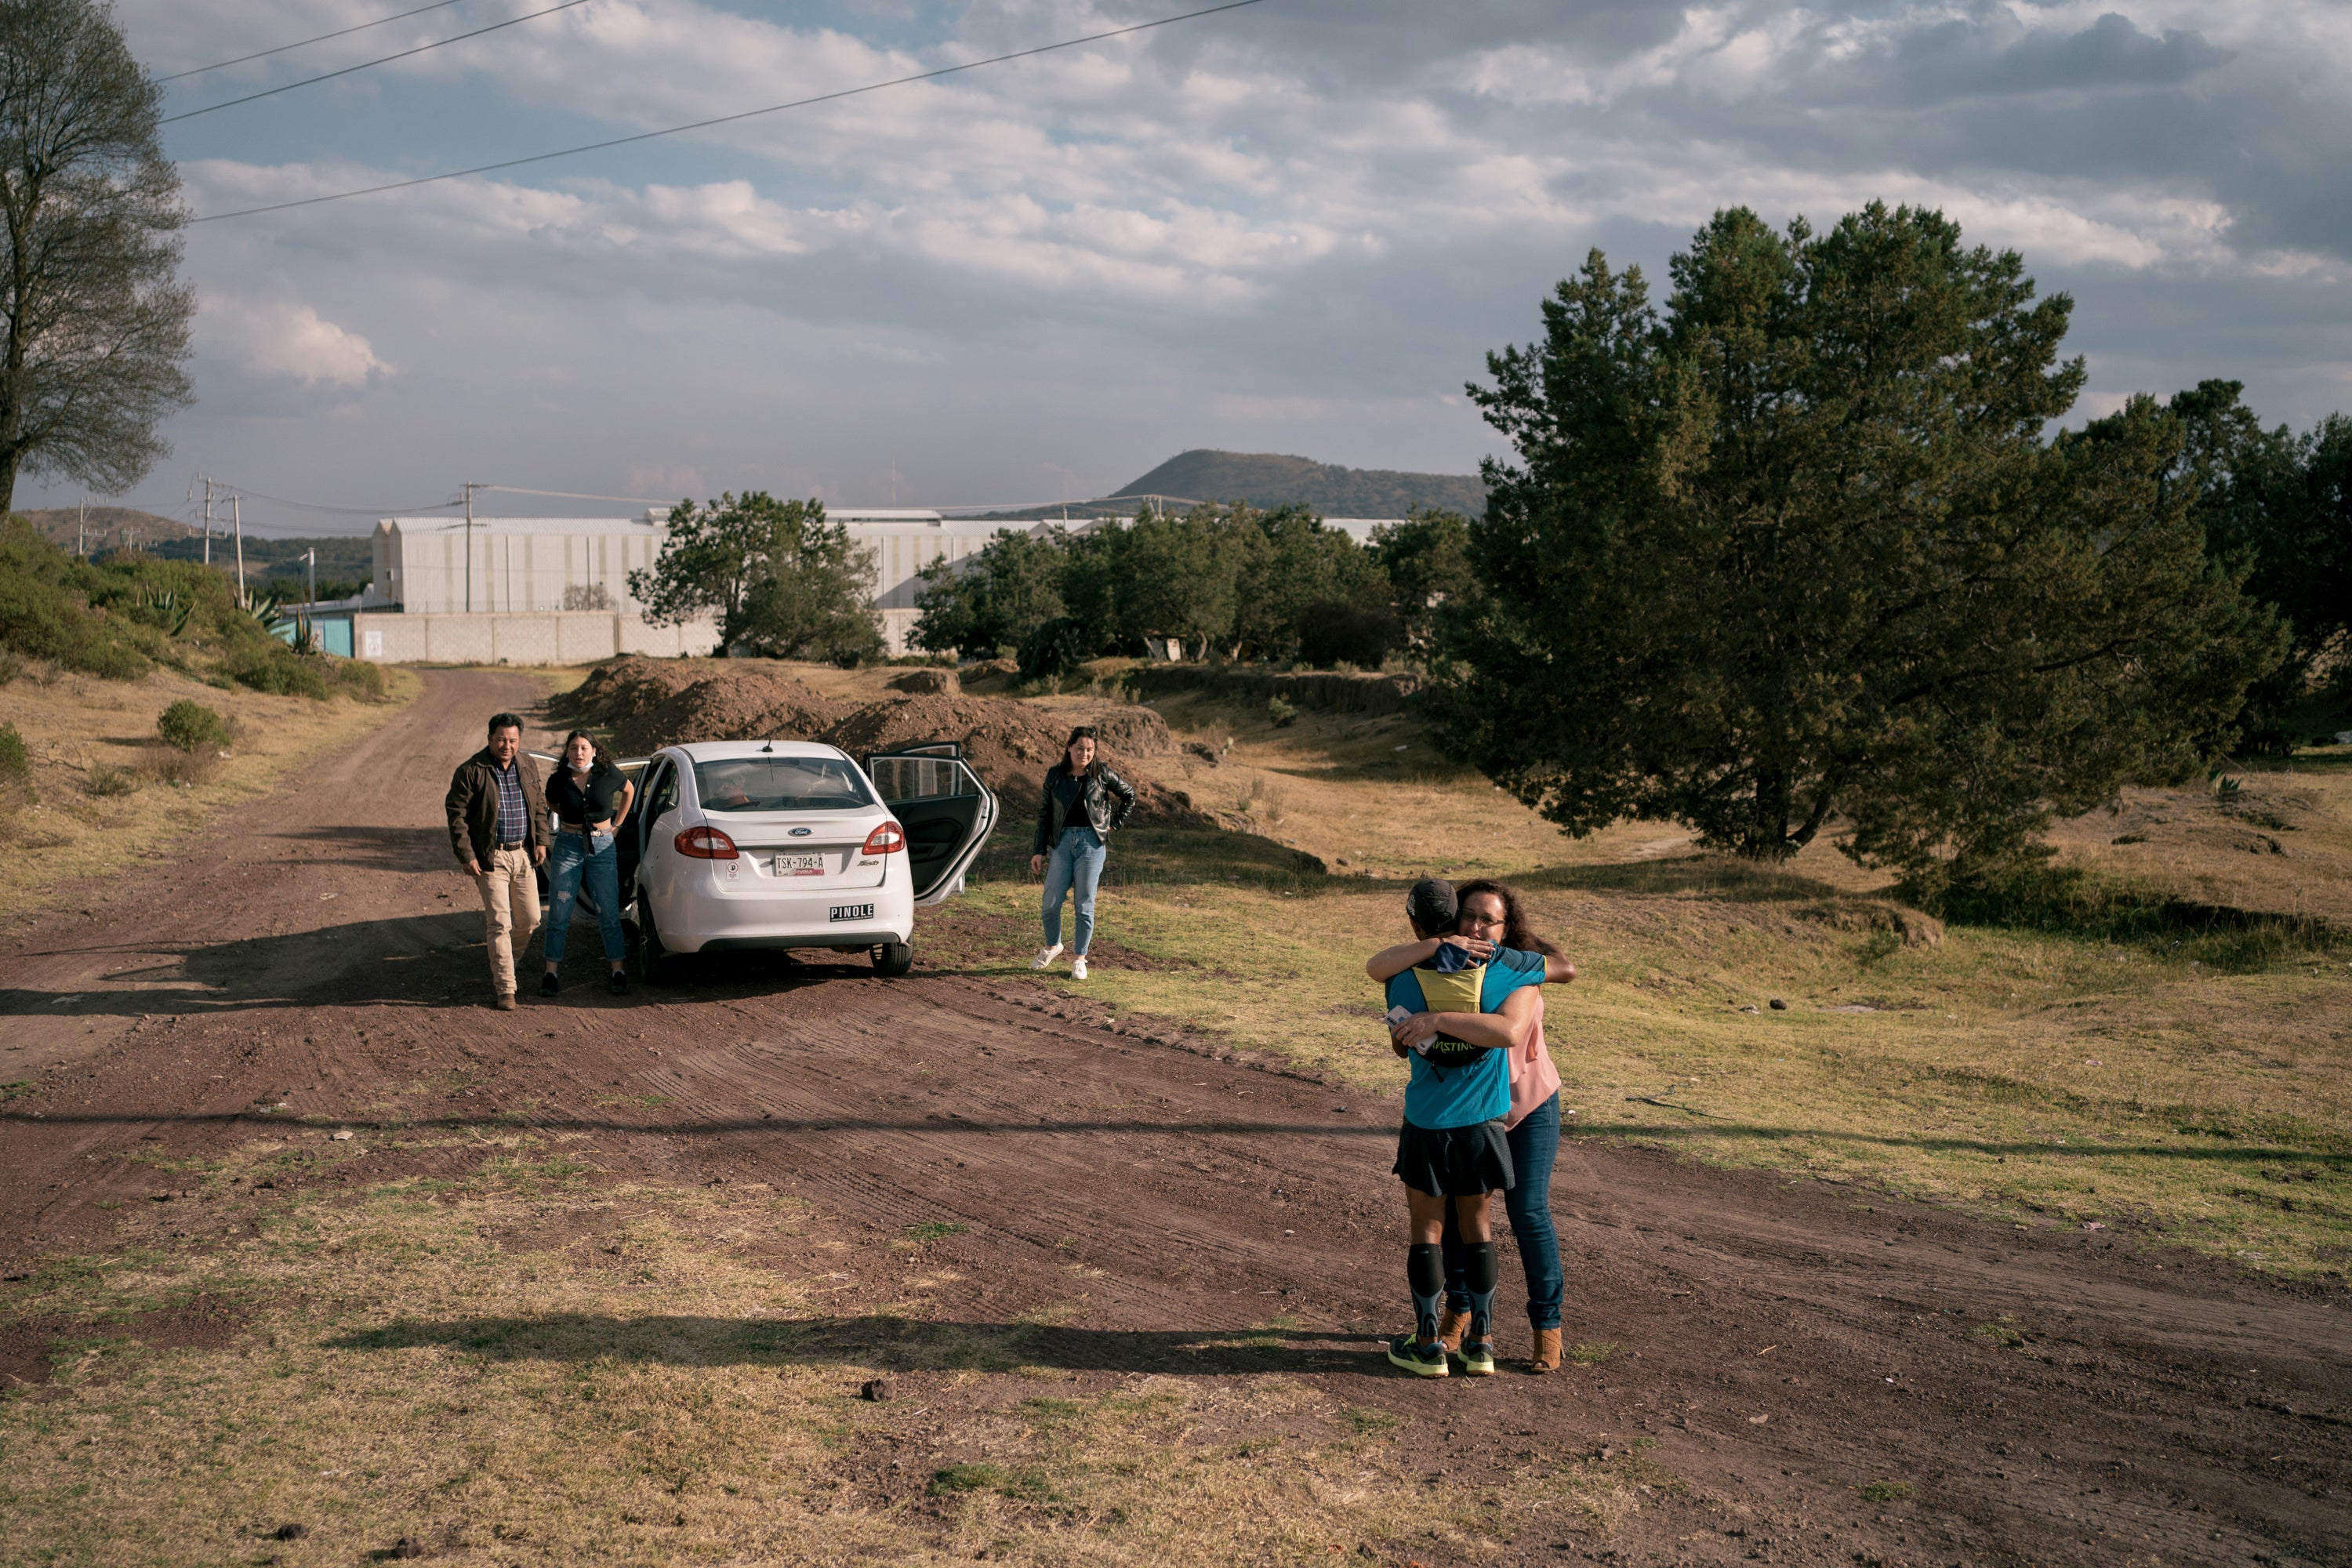 Silva hugs a niece who came to see him running while the rest of her family wait by their car on a dirt road